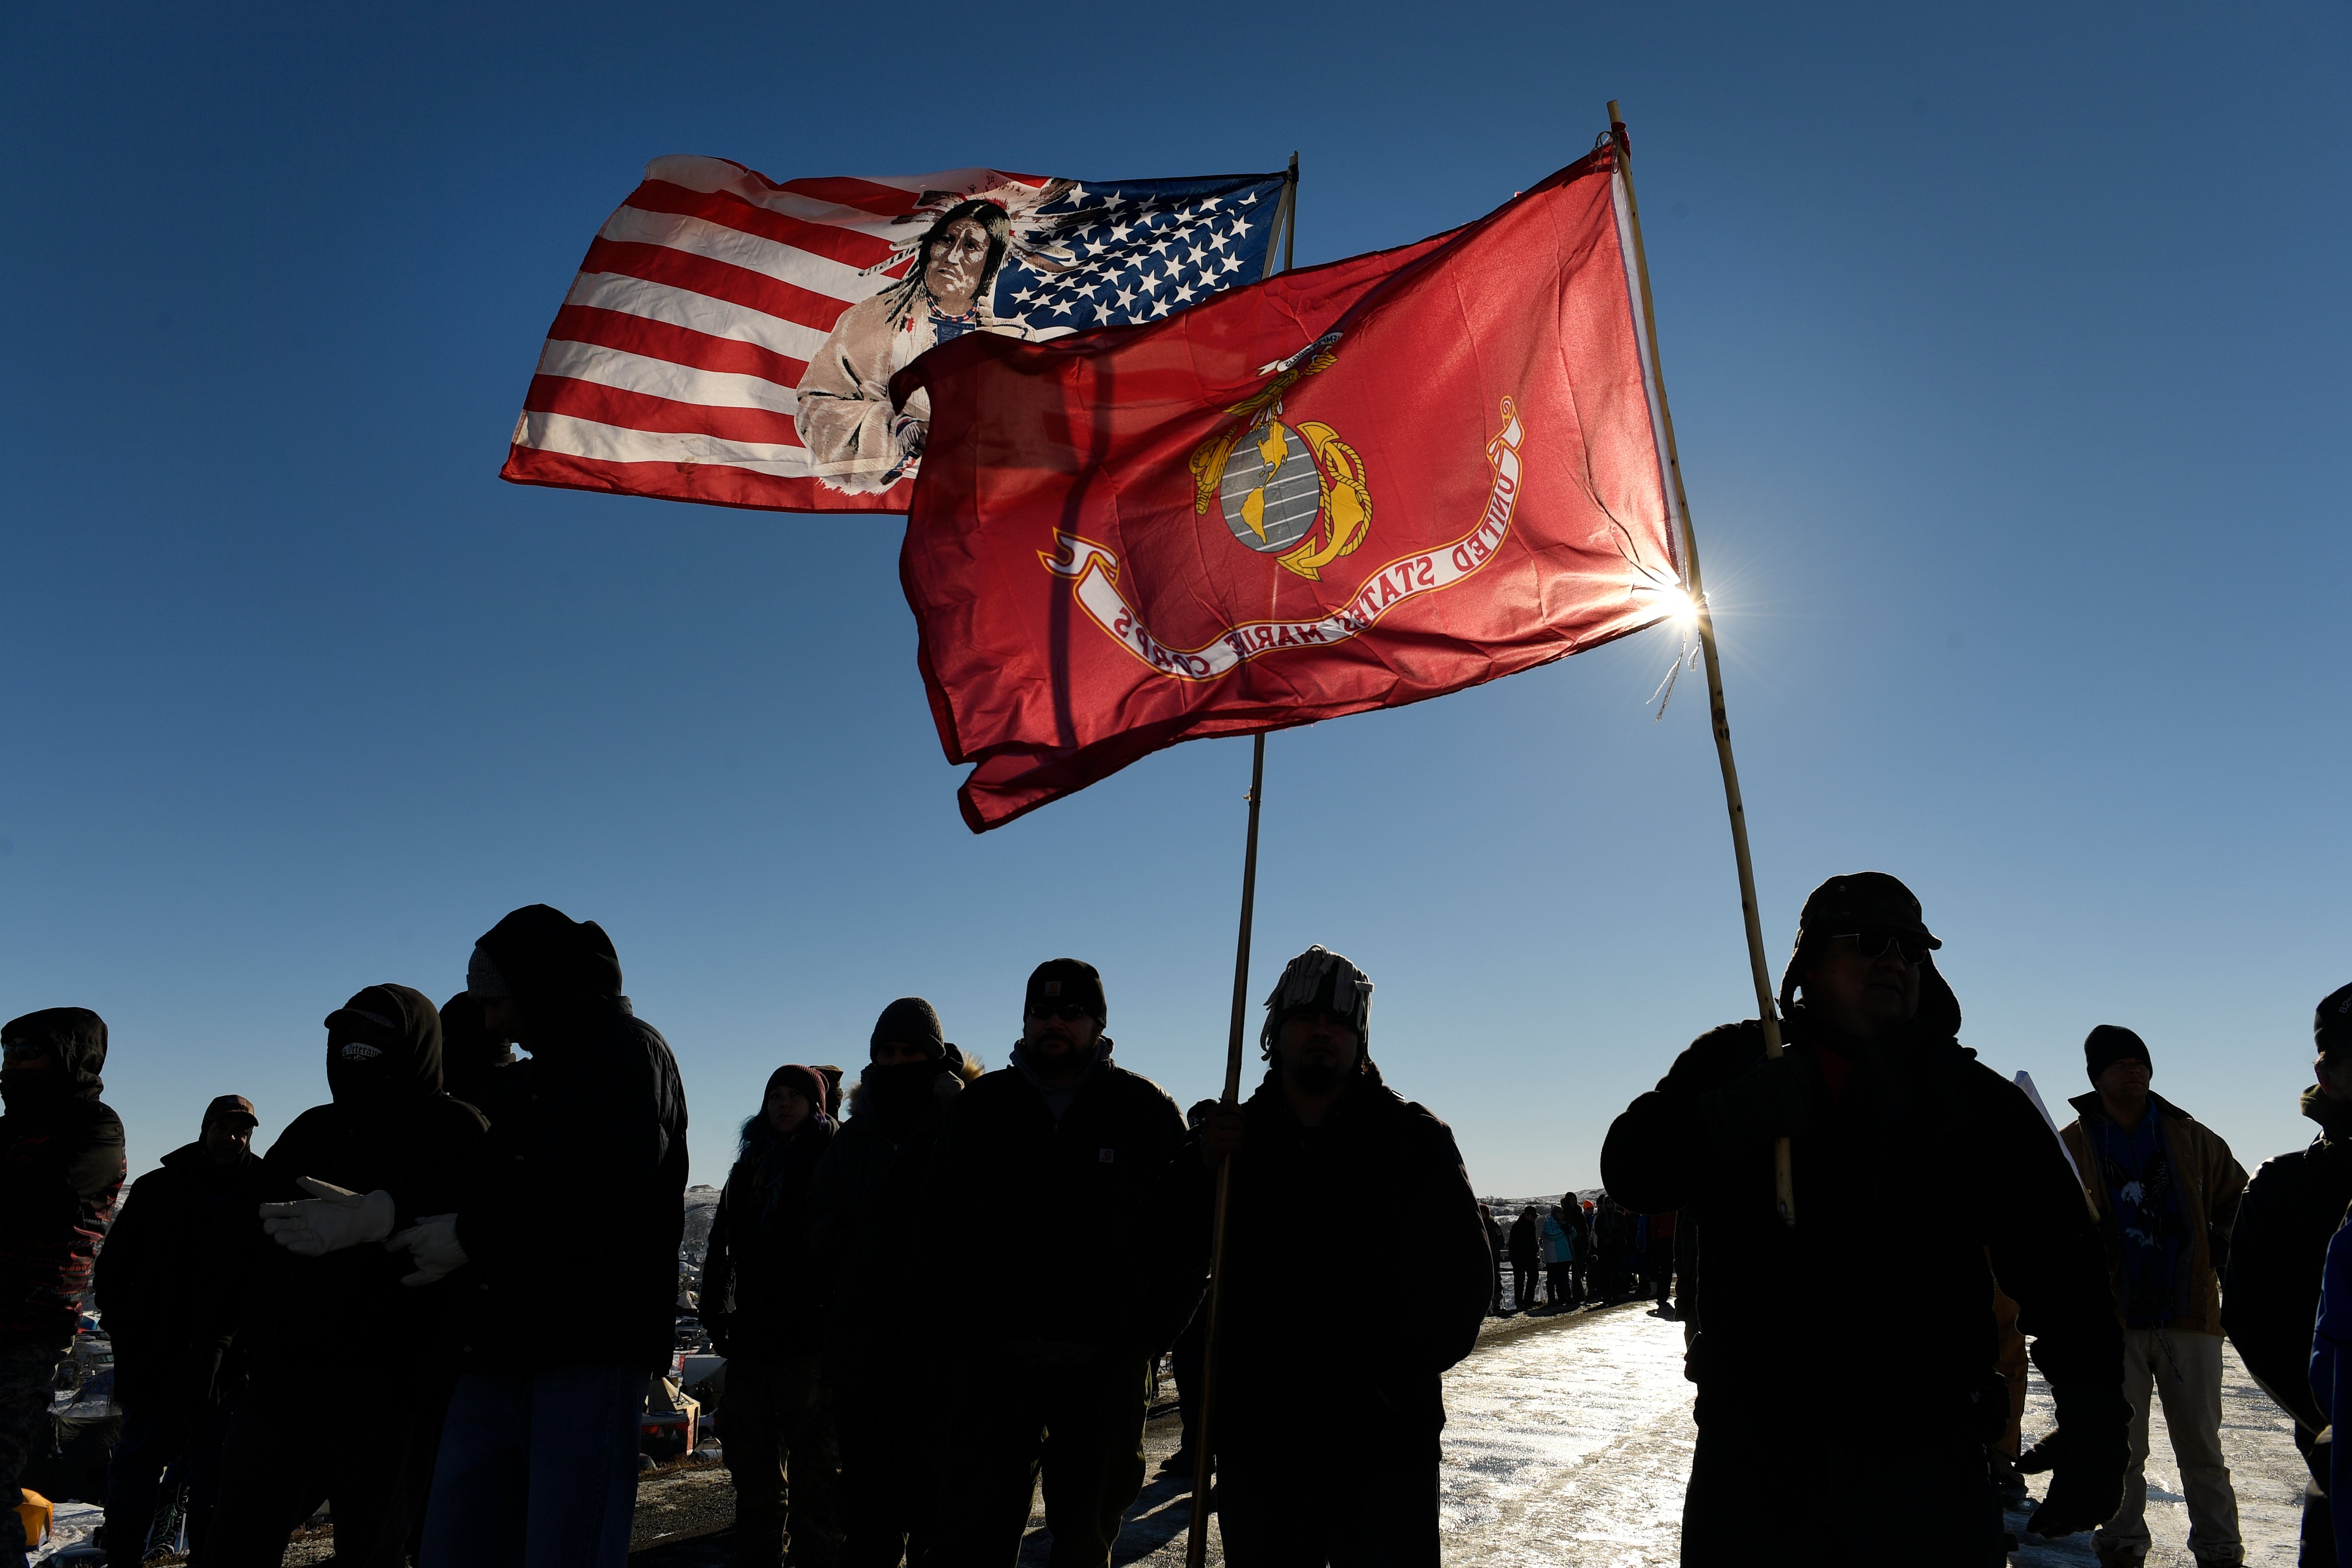 USveterans and native americans hold flags in solidarity at the Standing Rock Sioux Reservation on Dec. 4, 2016 outside Cannon Ball, North Dakota. (Helen H. Richardson—Denver Post/Getty Images)